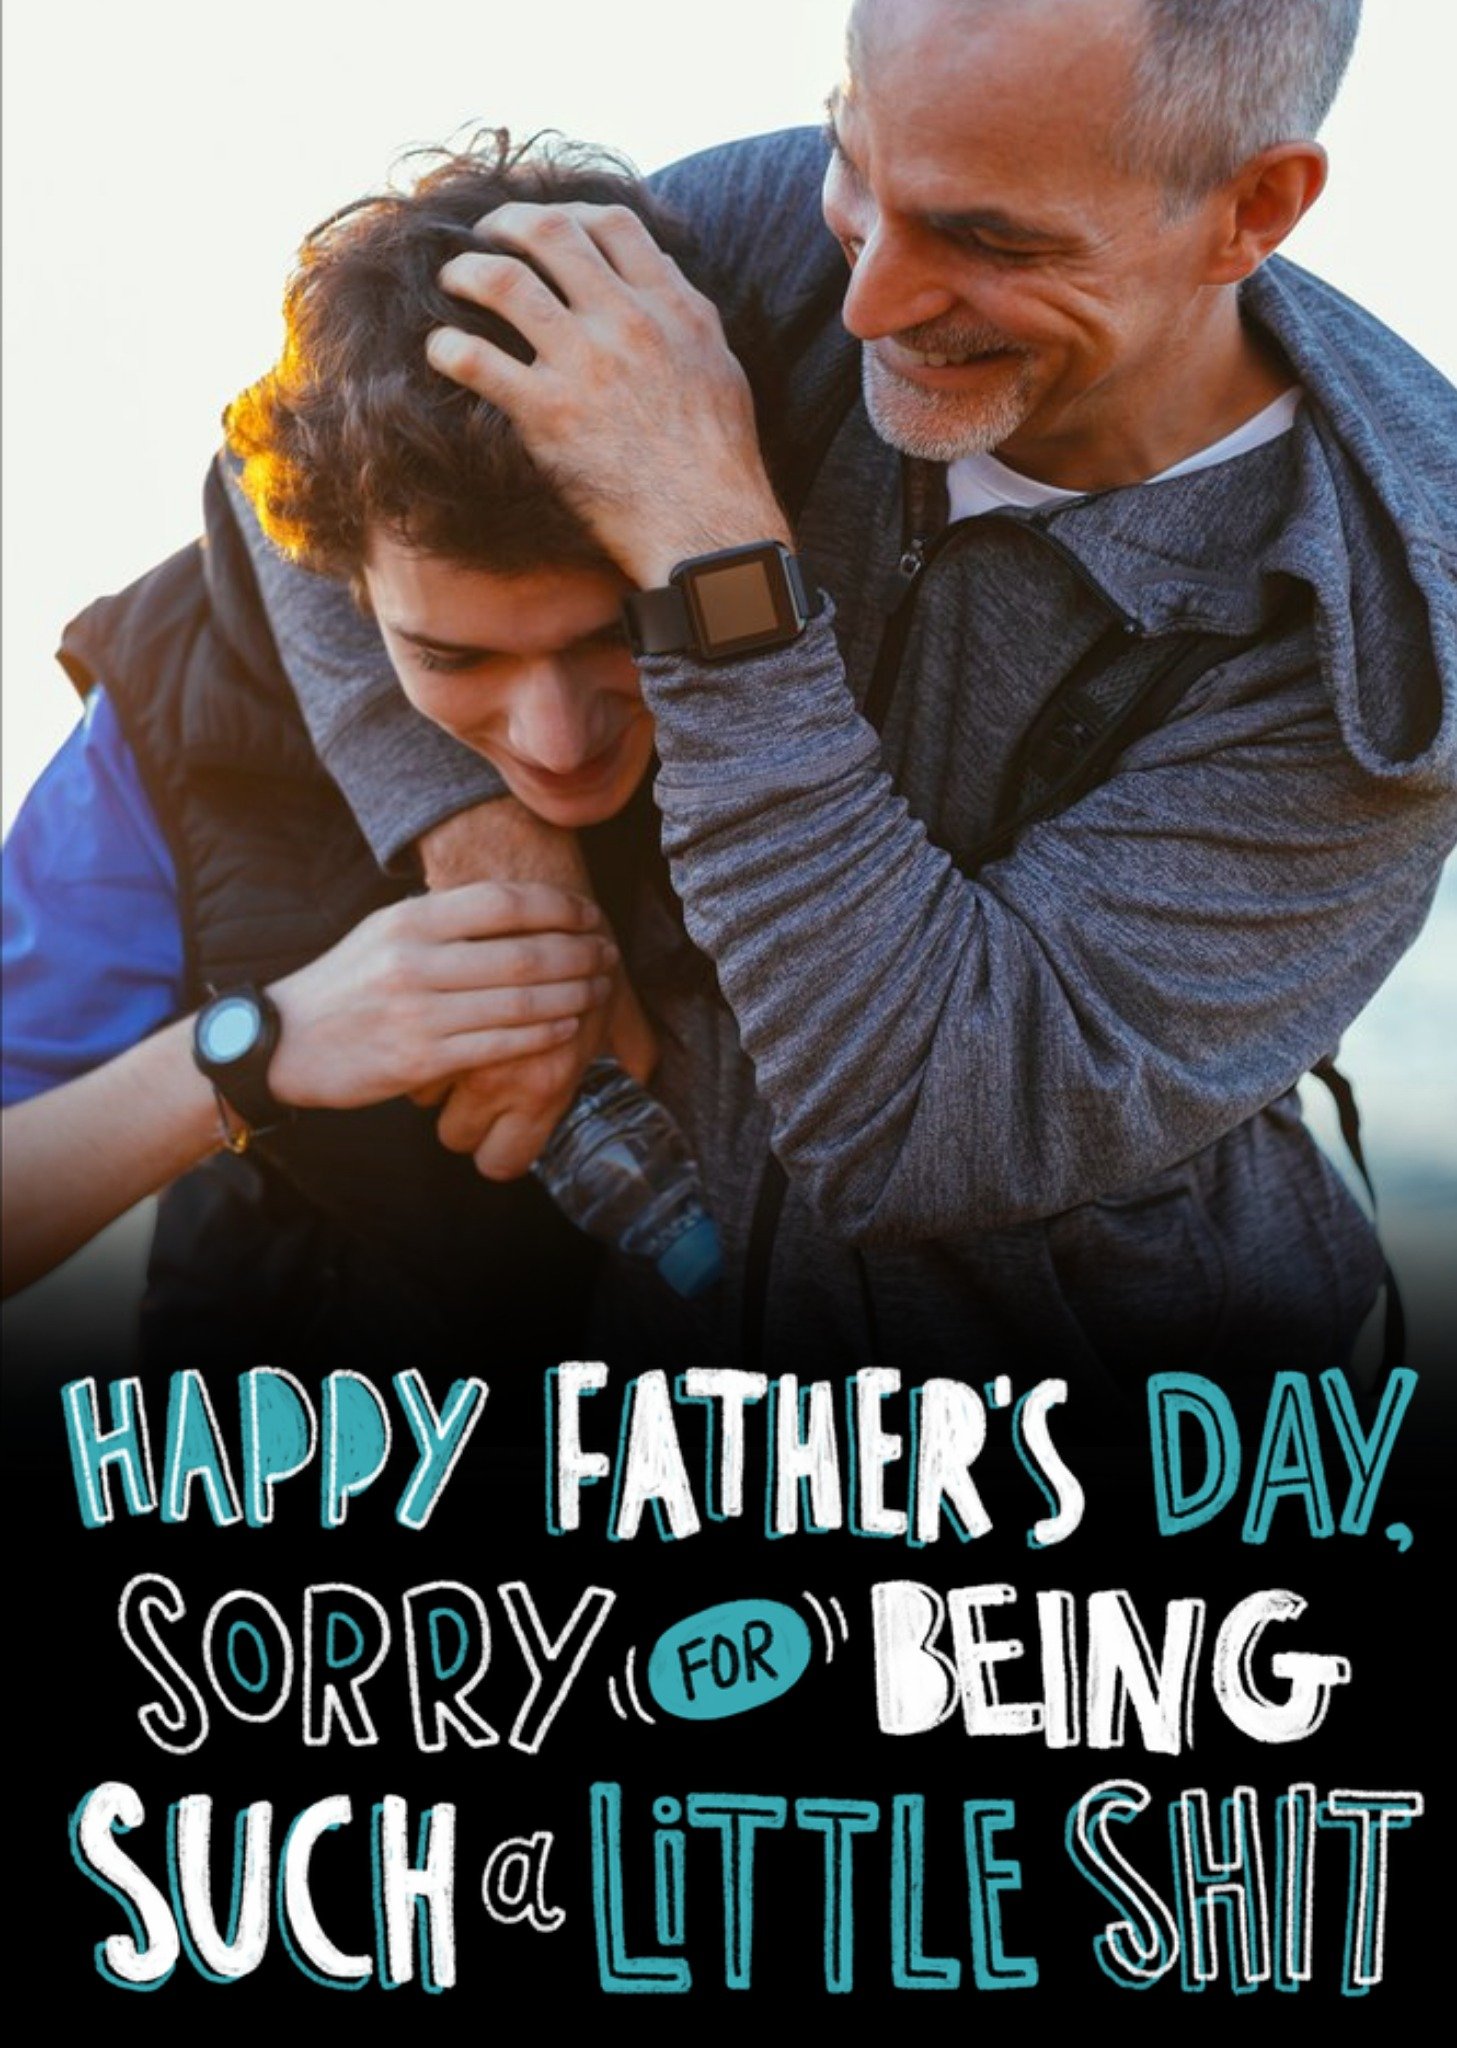 Moonpig Sorry For Being Such A Little Sh*t Funny Father's Day Photo Card, Large